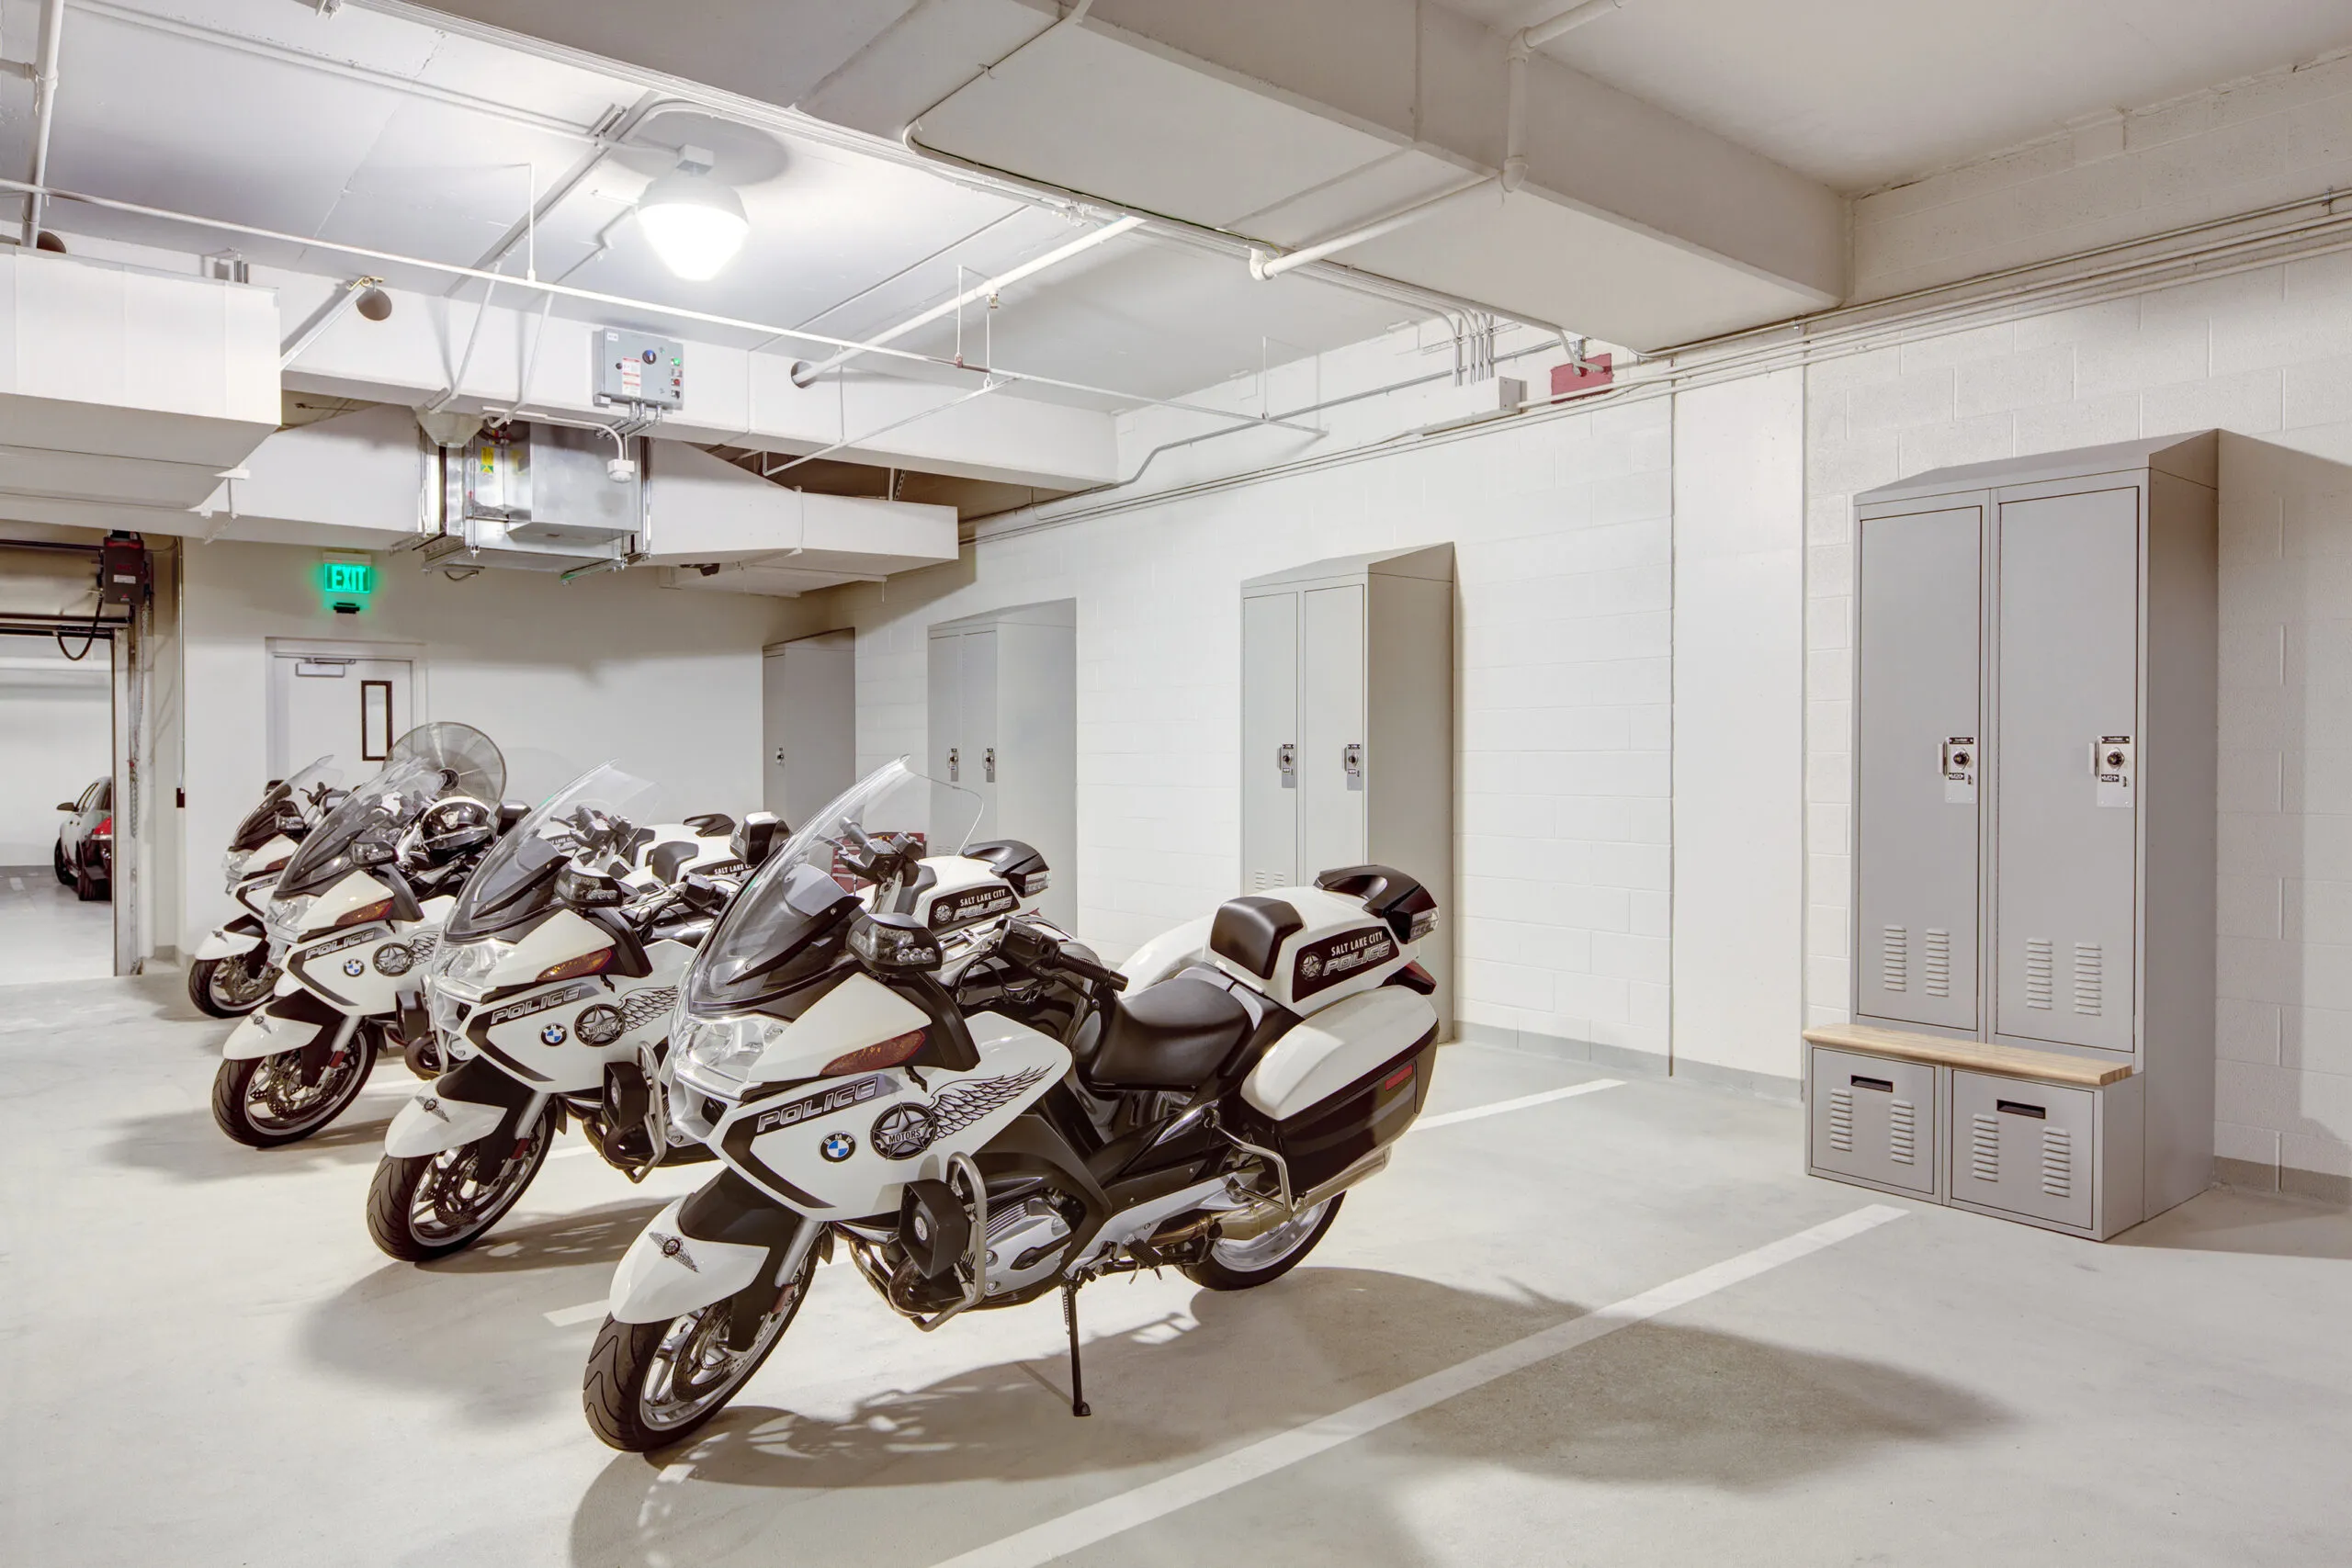 Motorcycle-Patrol-Lockers-in-Garage-at-Salt-Lake-City-Public-Safety-Building-scaled